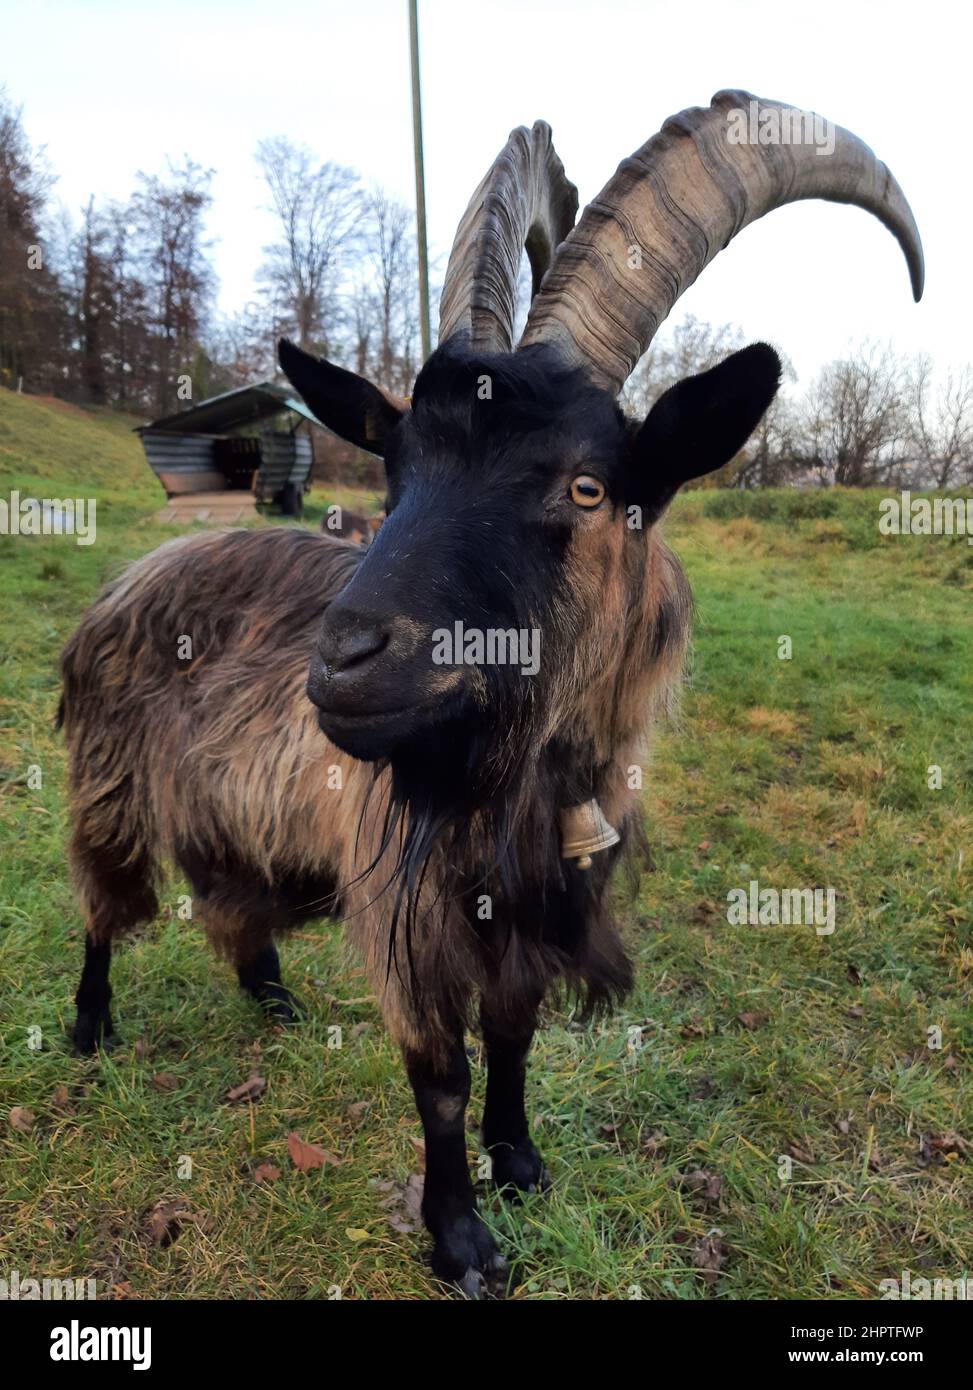 Curious Stiefelgeiss goat on the slopes of Uetliberg Mountain, Zurich, Switzerland. Picture of rare, endangered goat species Stock Photo